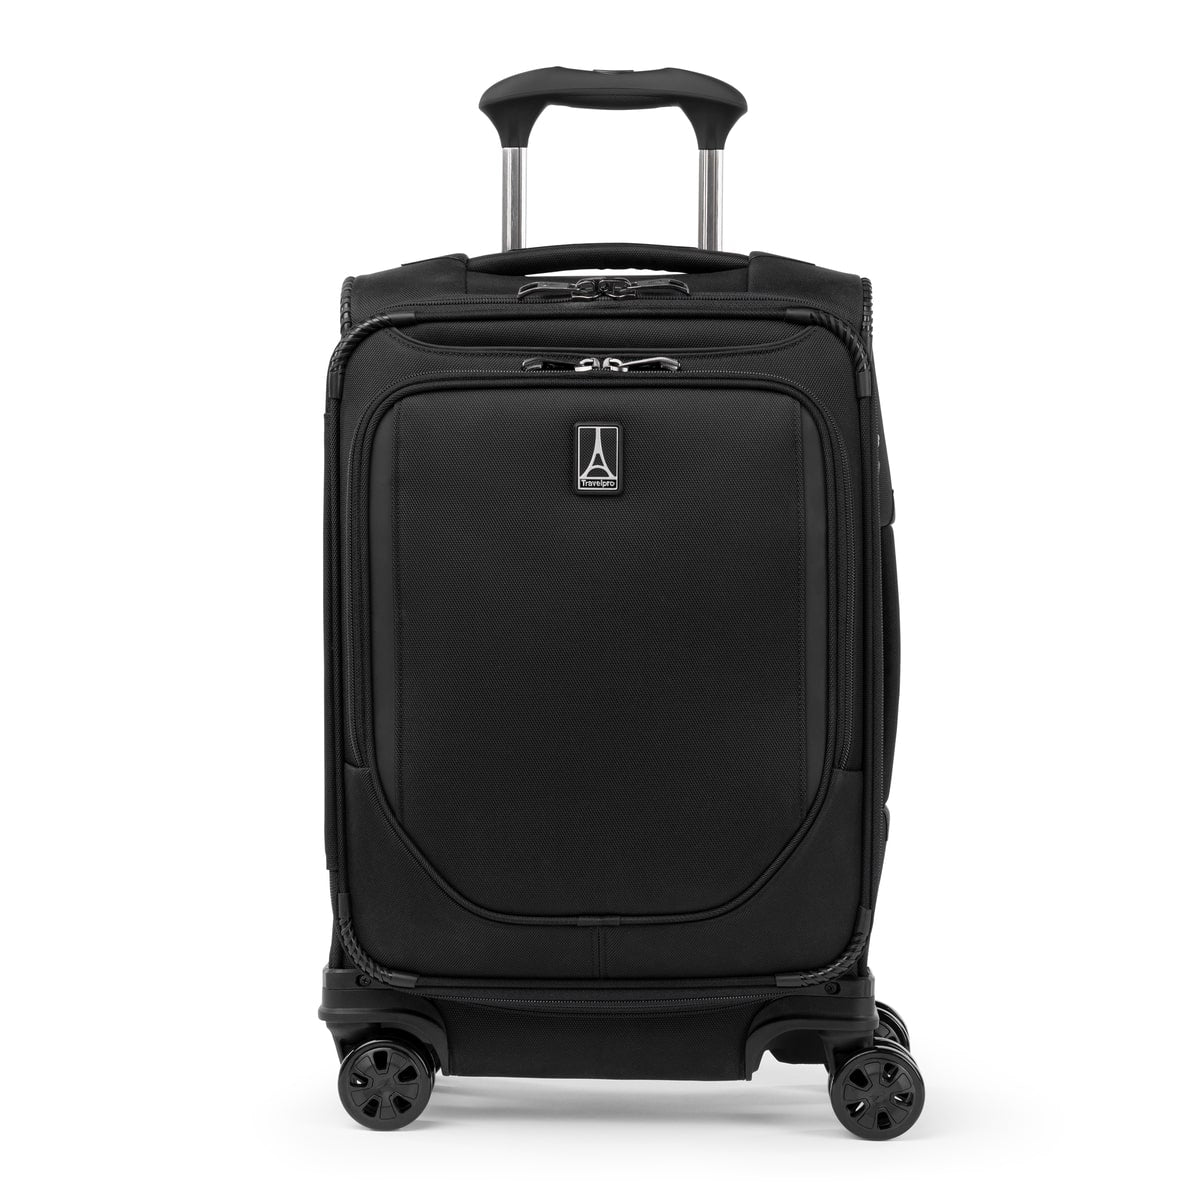 Crew™ Classic Compact Carry-On Expandable Spinner (Porte-bagages compacts et extensibles)